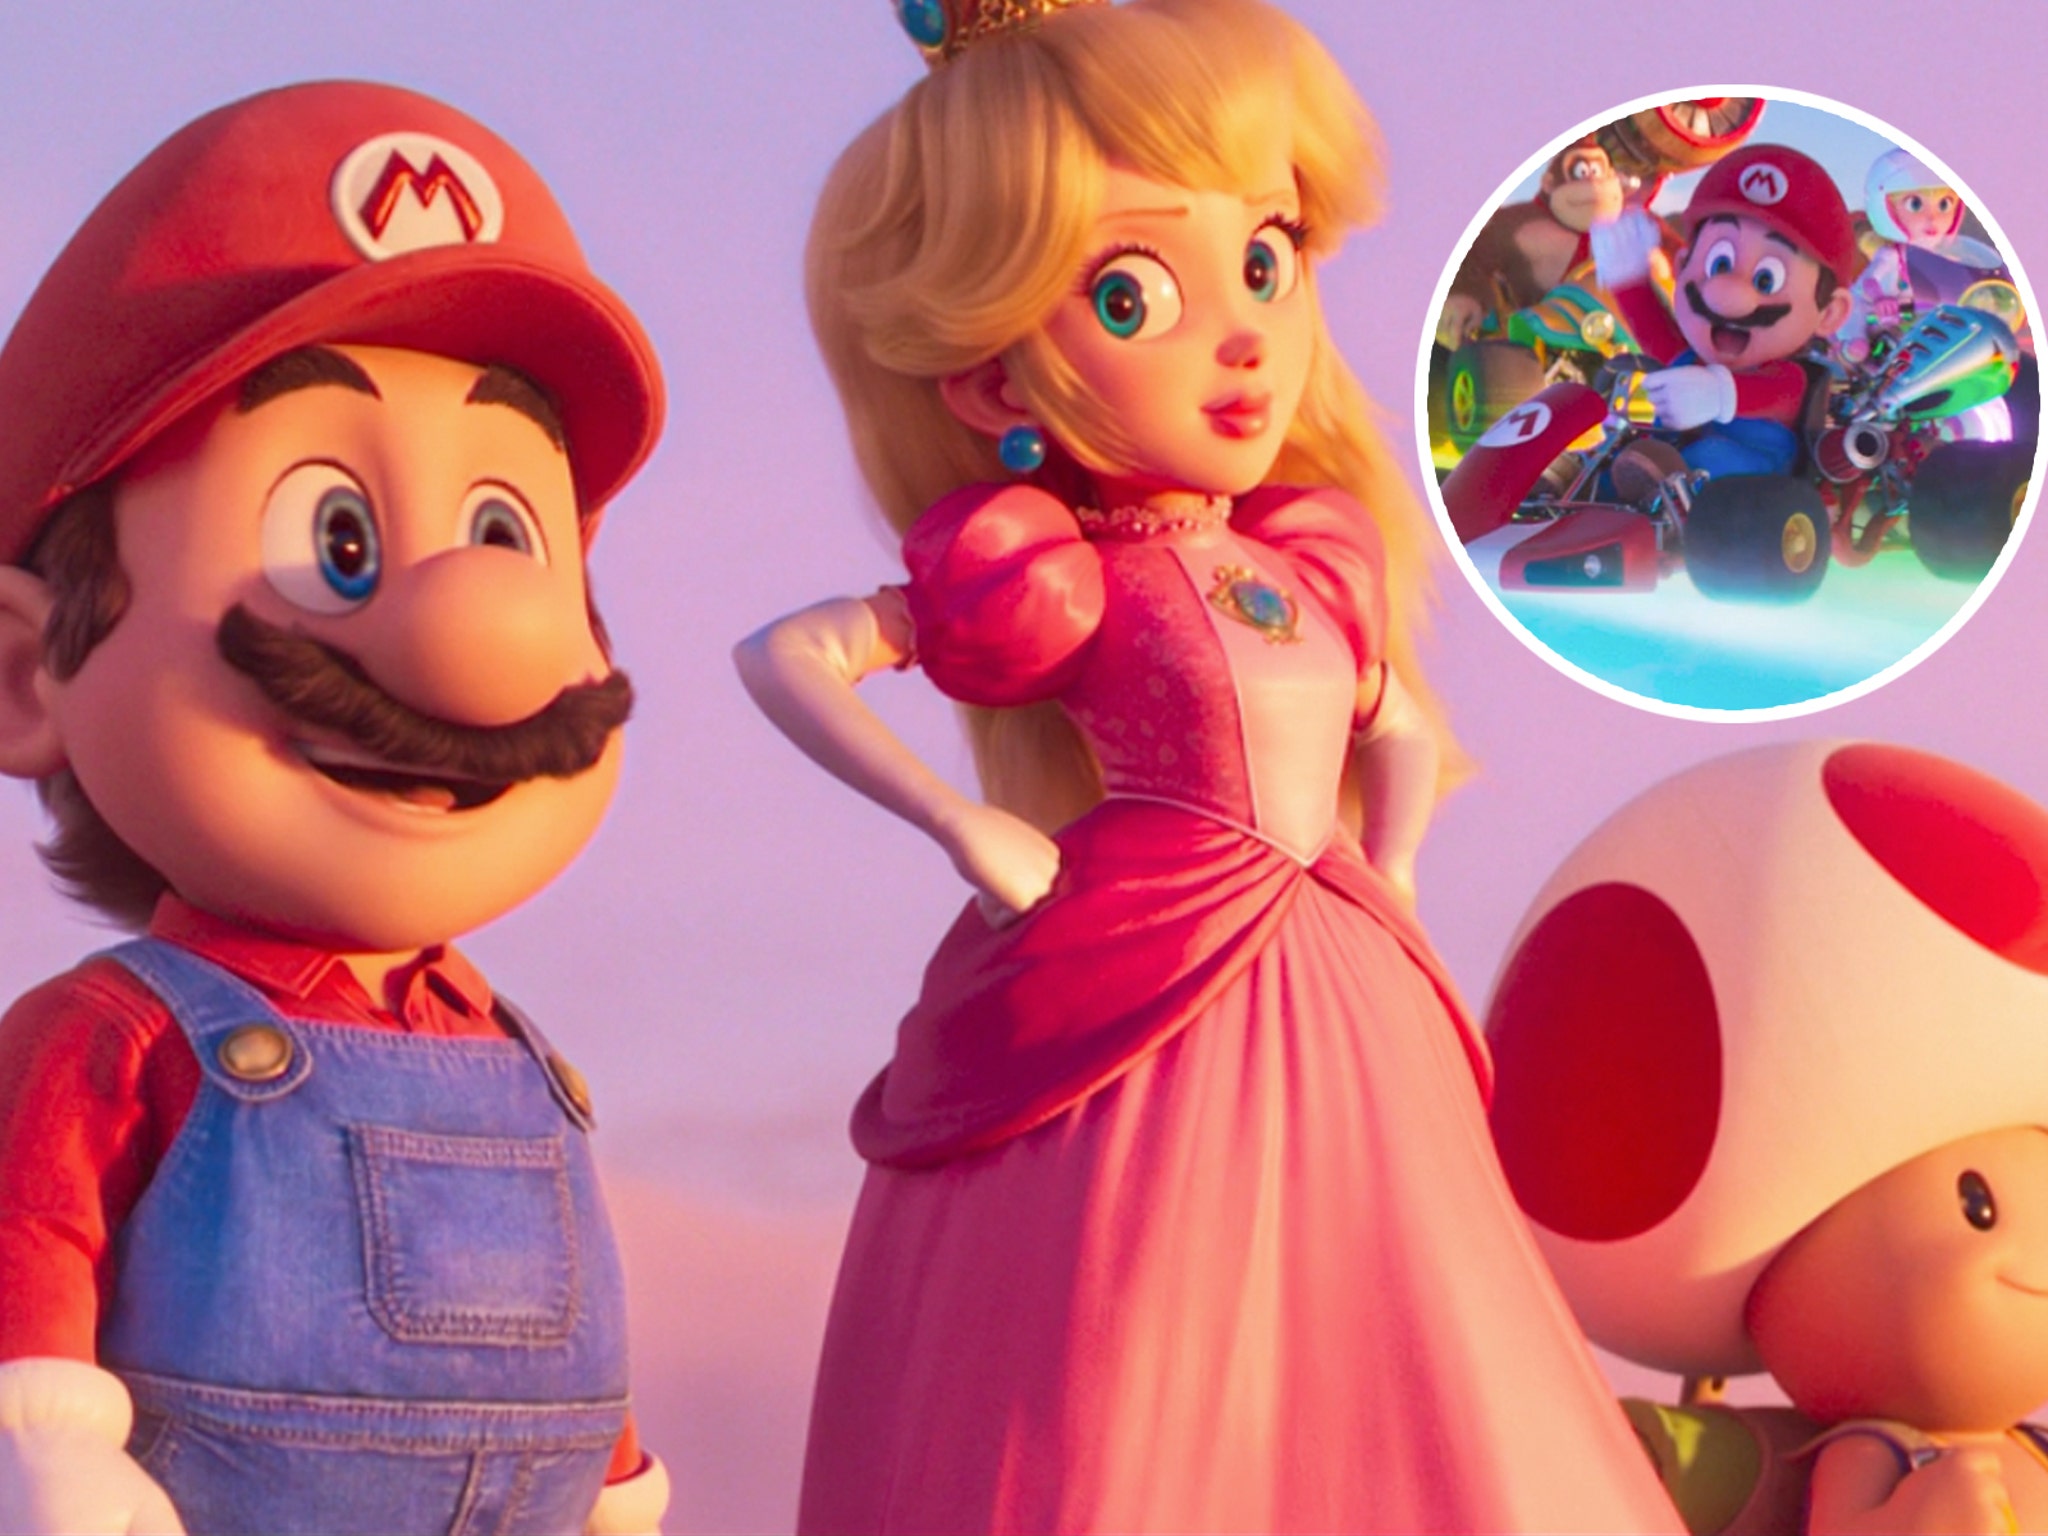 Jack Black Voices Bowser In The Trailer For The New Super Mario Movie